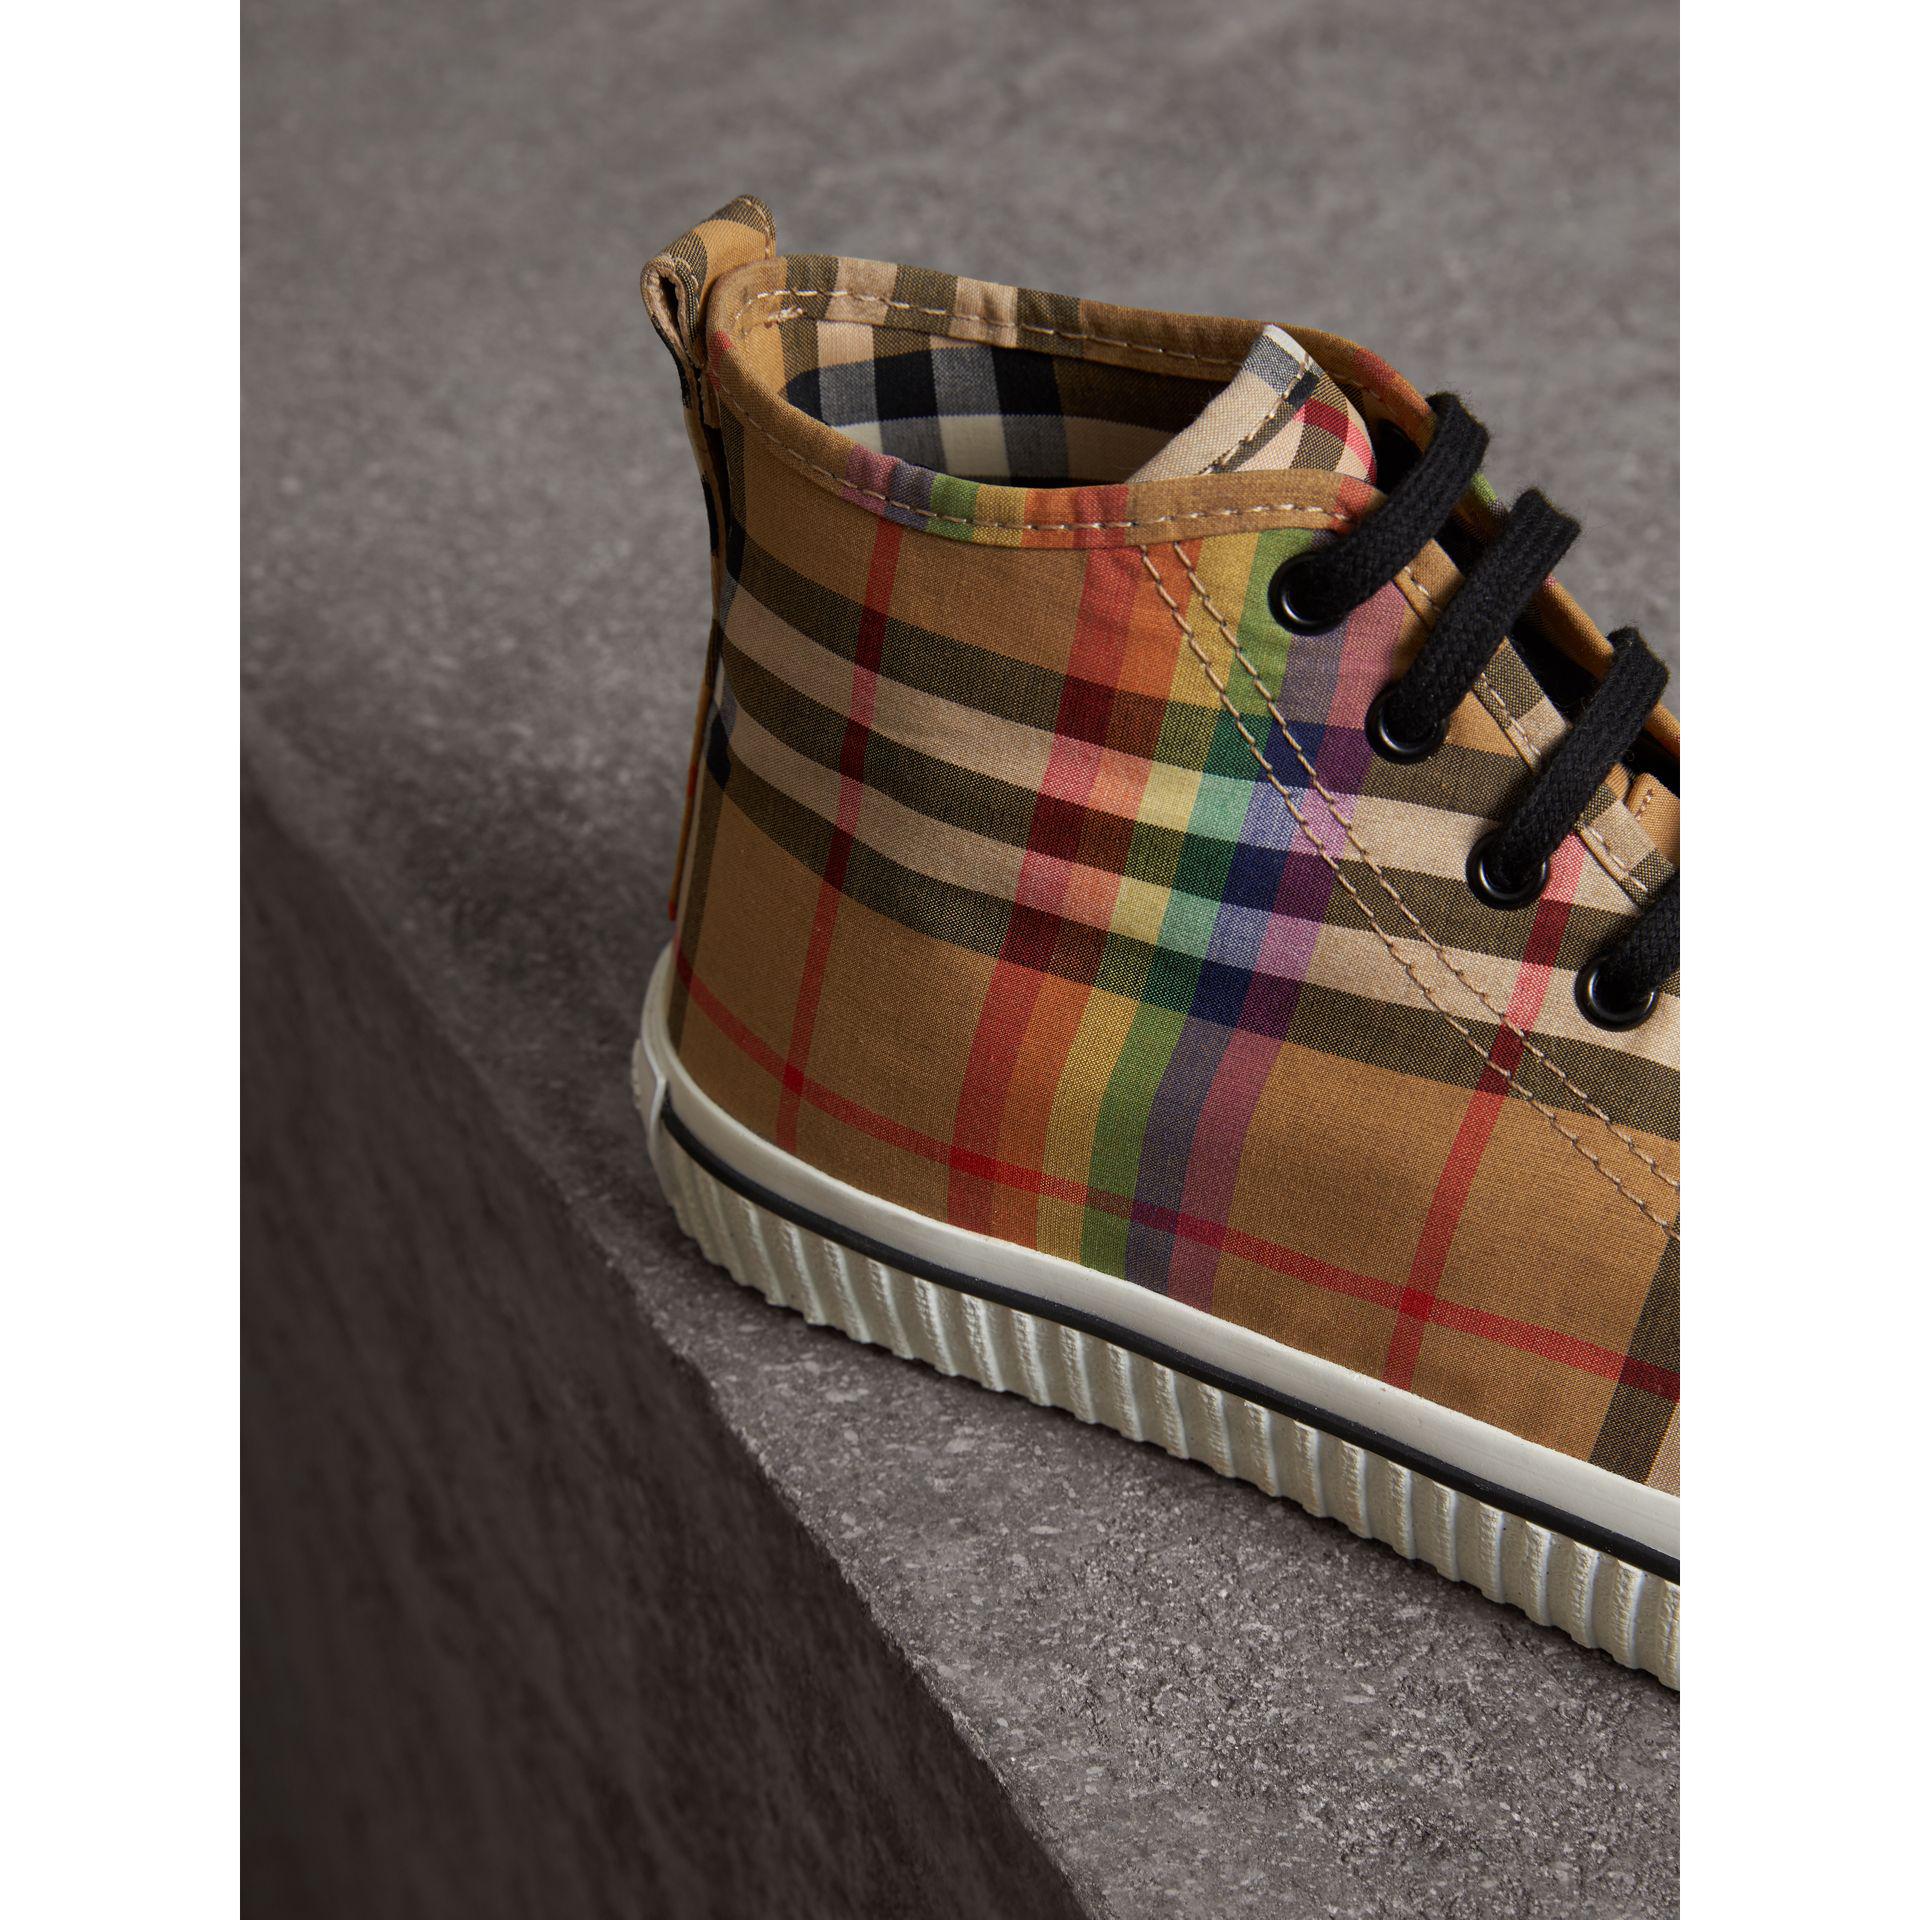 burberry rainbow vintage check sneakers